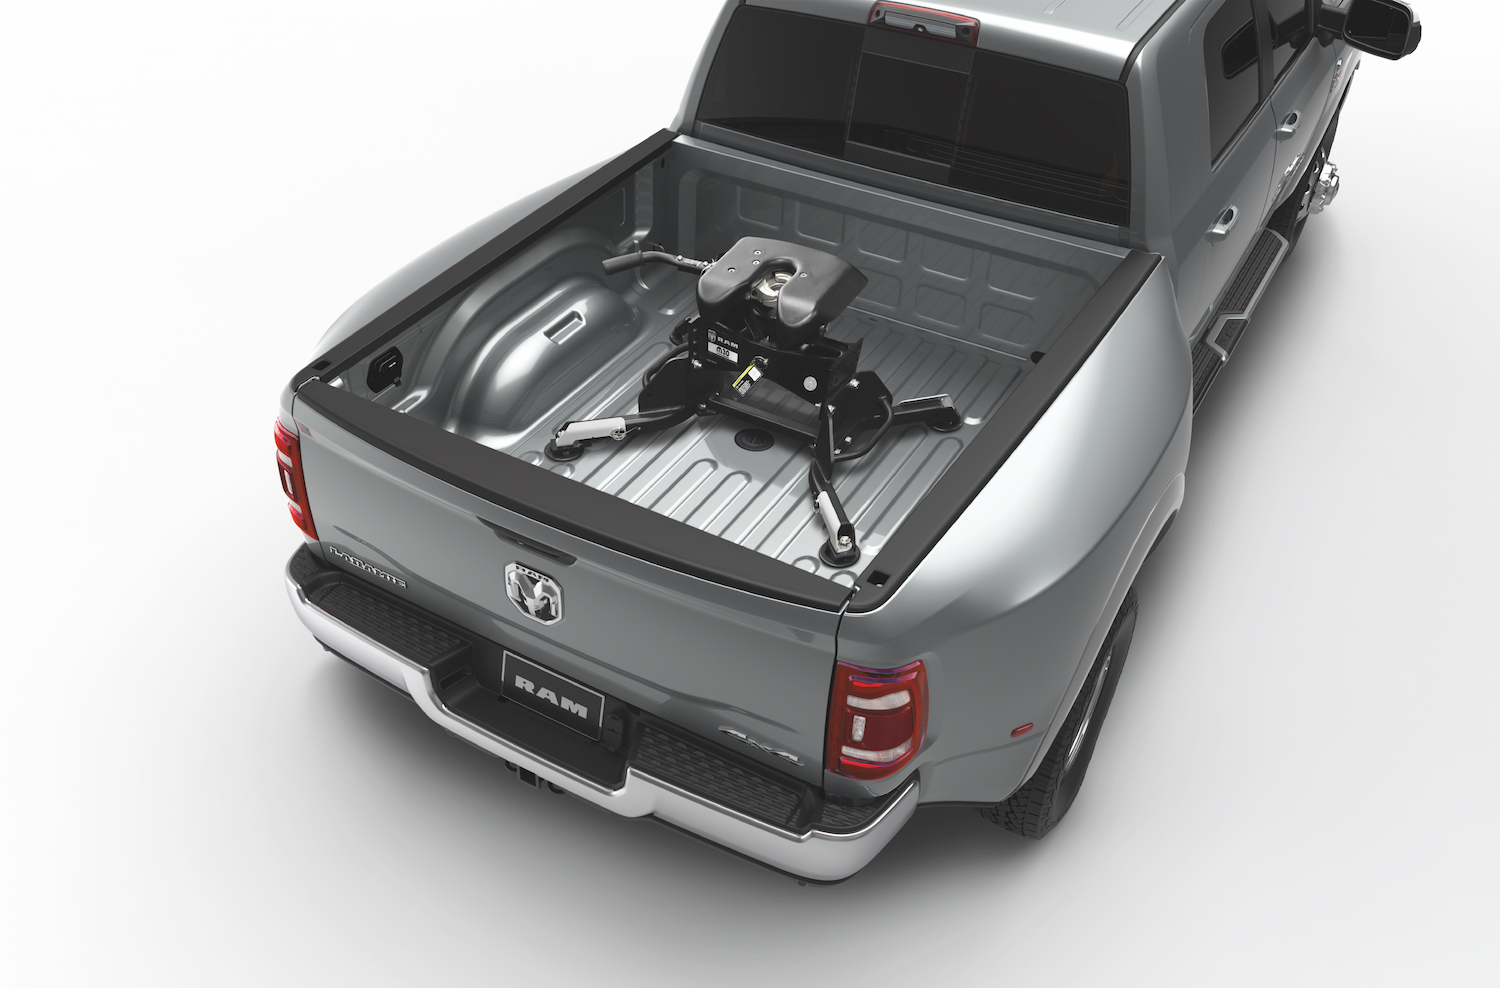 Fifth wheel hitch installed in the bed of a heavy-duty Ram pickup.